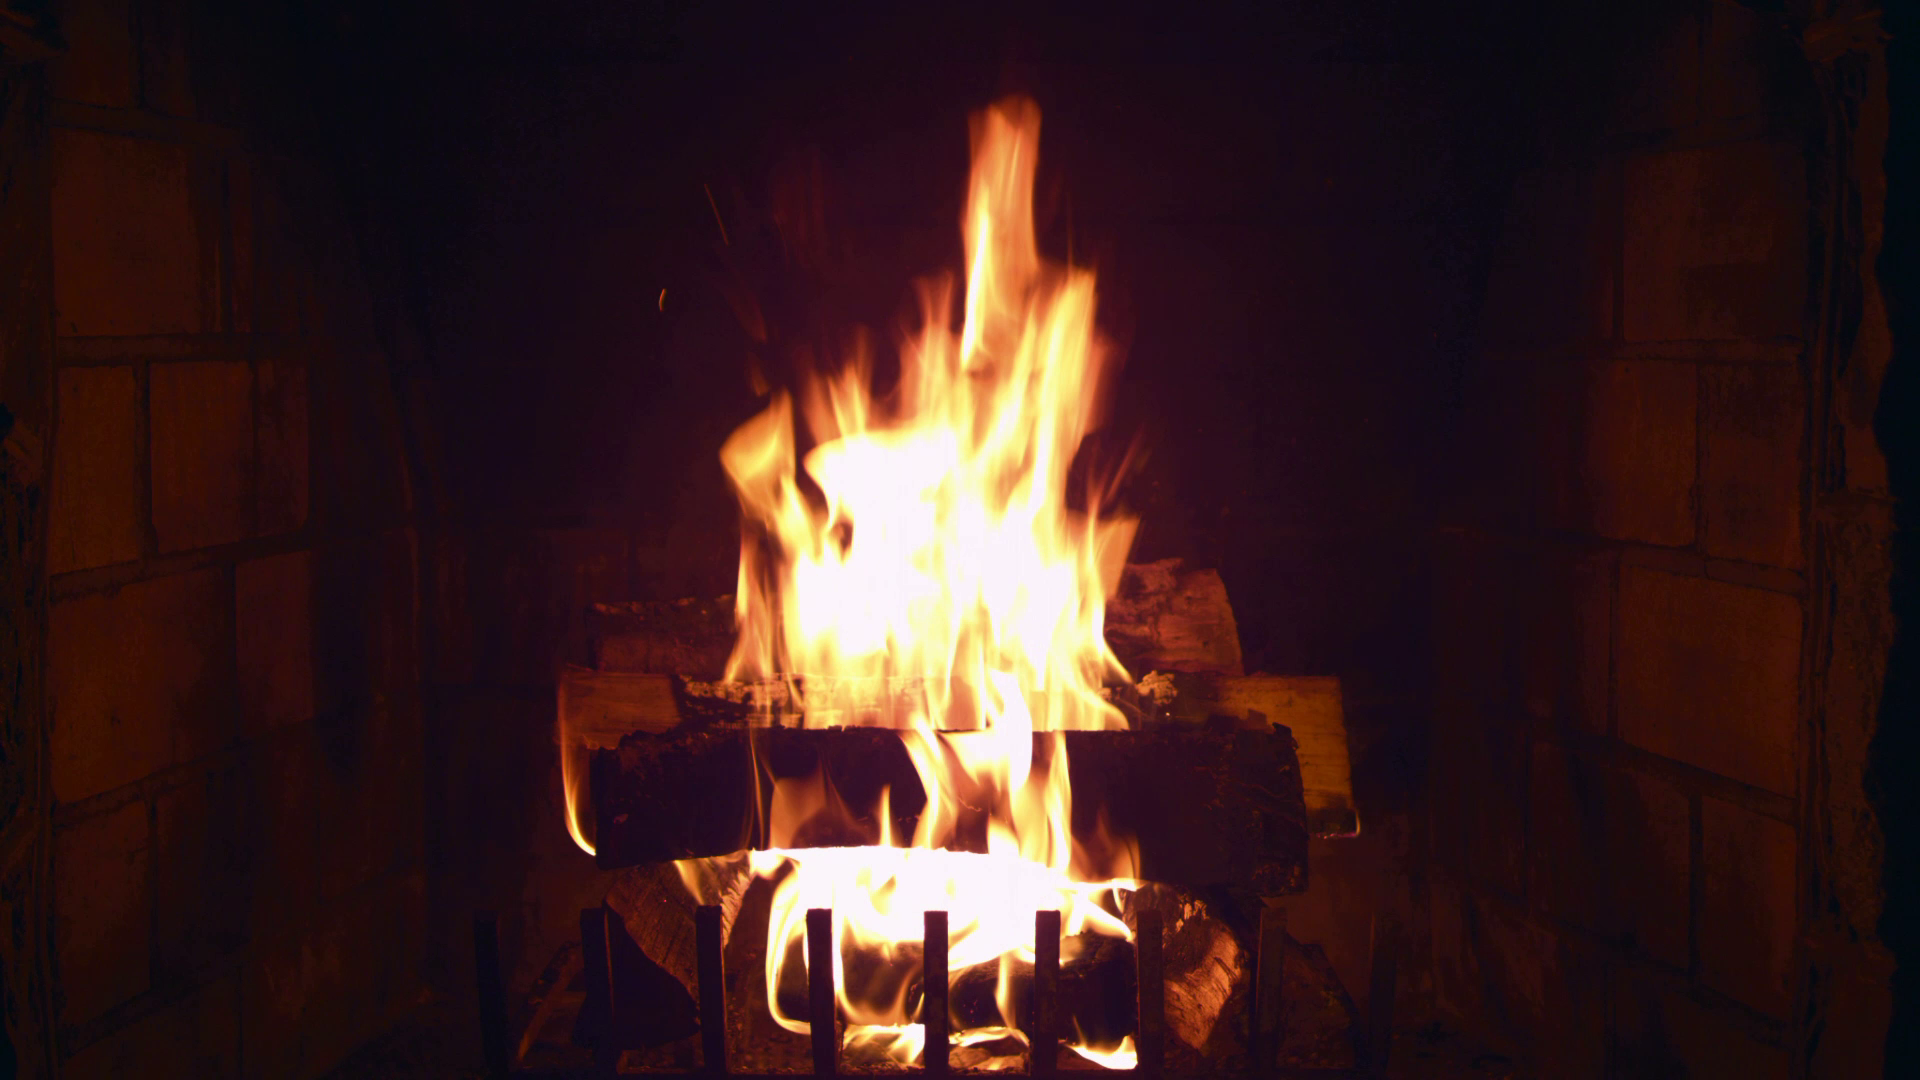 image For > Fireplace Gif. Fireplace, Image, Children image